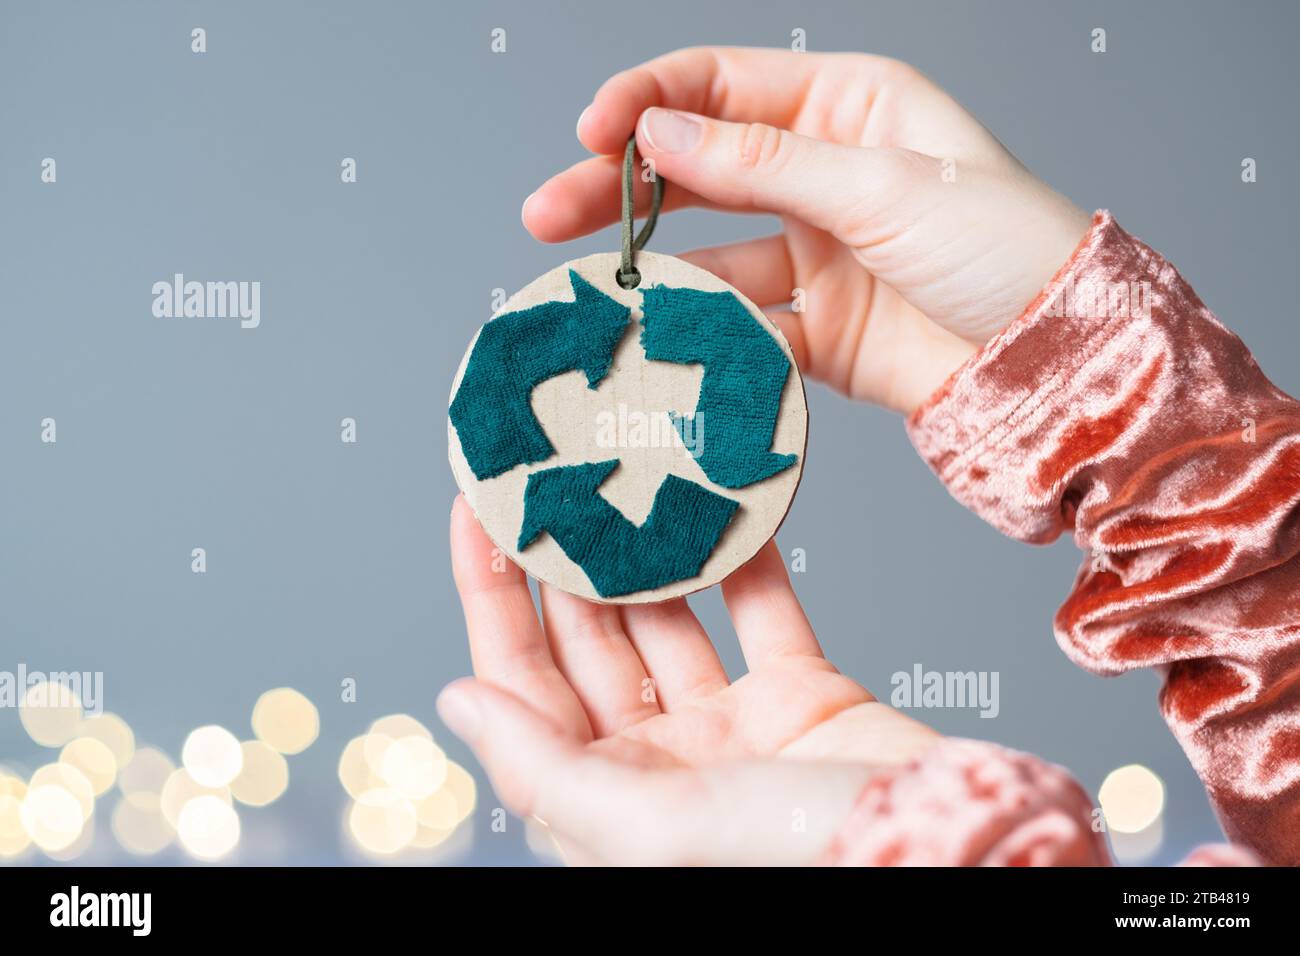 A symbol of recycling in the form of a Christmas tree decoration in a woman's hands. Clothing recycling. Ecological and sustainable fashion. Stock Photo